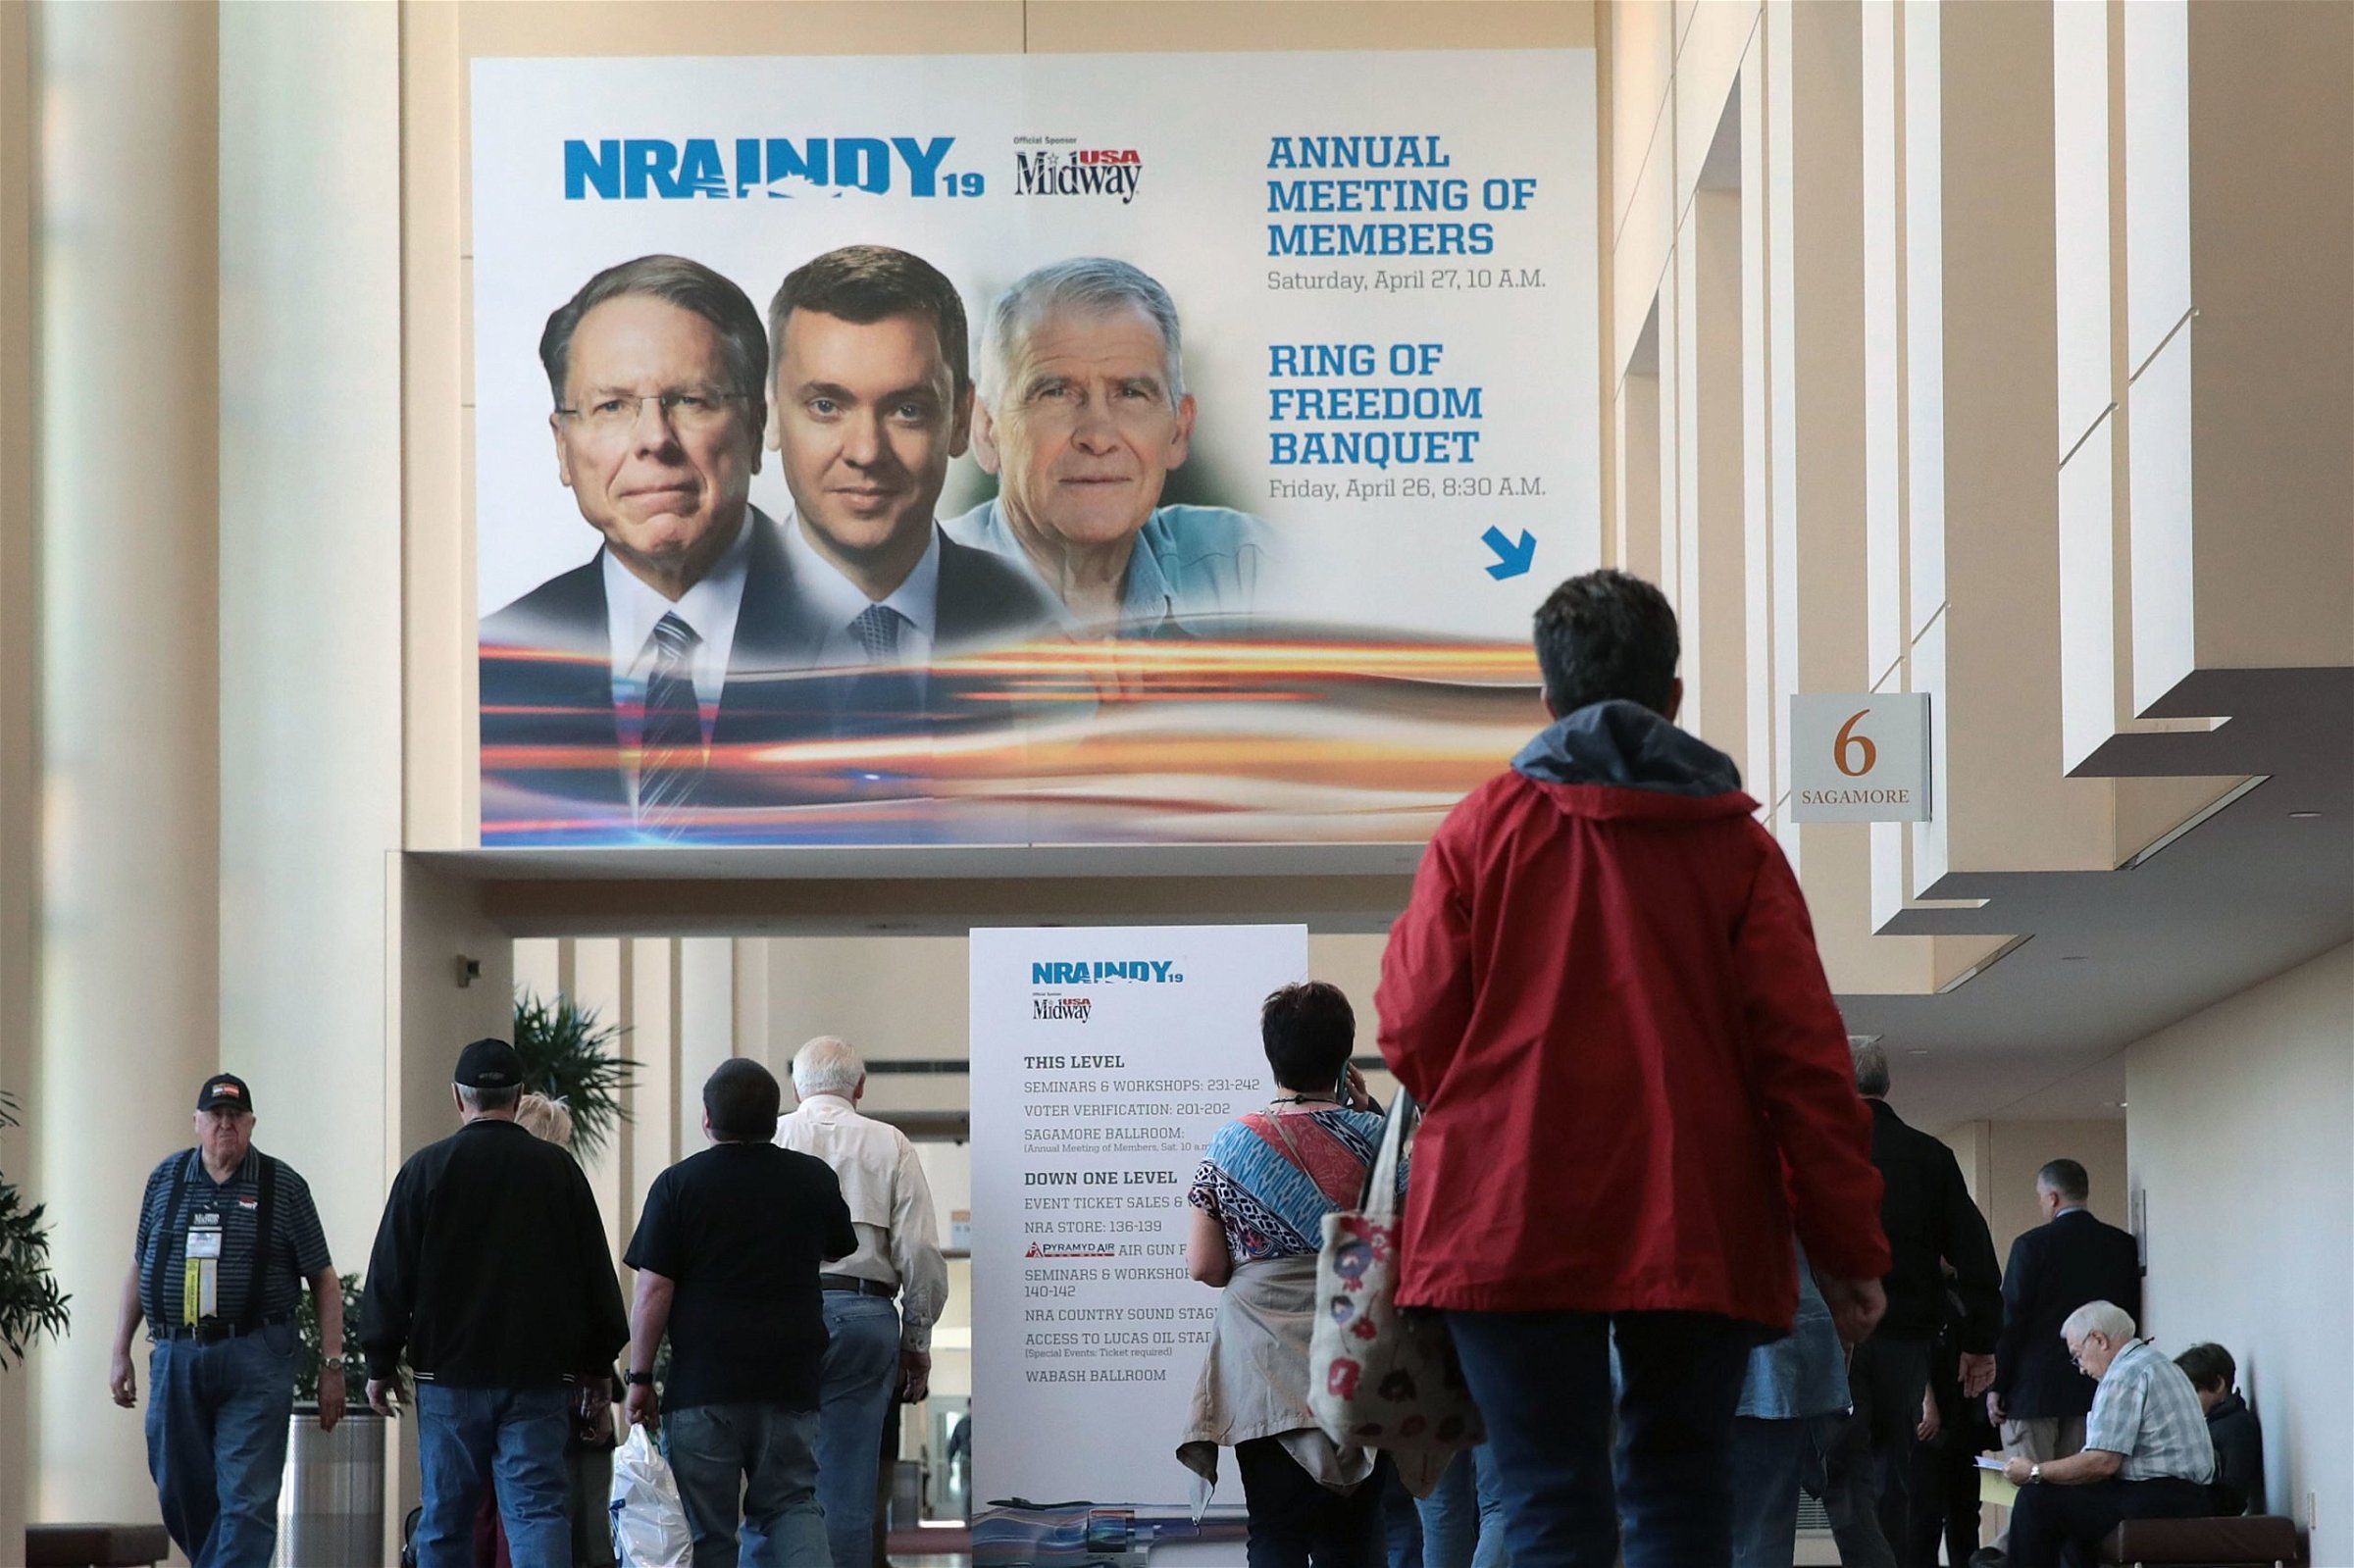 INDIANAPOLIS, INDIANA - APRIL 27: Guest walk under a poster featuring Wayne LaPierre (L), NRA vice president and CEO, Chris Cox (C), executive director of the NRA-ILA, and NRA president Oliver North outside a conference room where the NRA annual meeting of members was being held at the 148th NRA Annual Meetings & Exhibits on April 27, 2019 in Indianapolis, Indiana. A statement was read at the meeting announcing that NRA president Oliver North, whose seat at the head table remained empty at the event, would not serve another term. There have been recent reports of tension between LaPierre and North, with North citing financial impropriety within the organization. (Scott Olson/Getty Images)